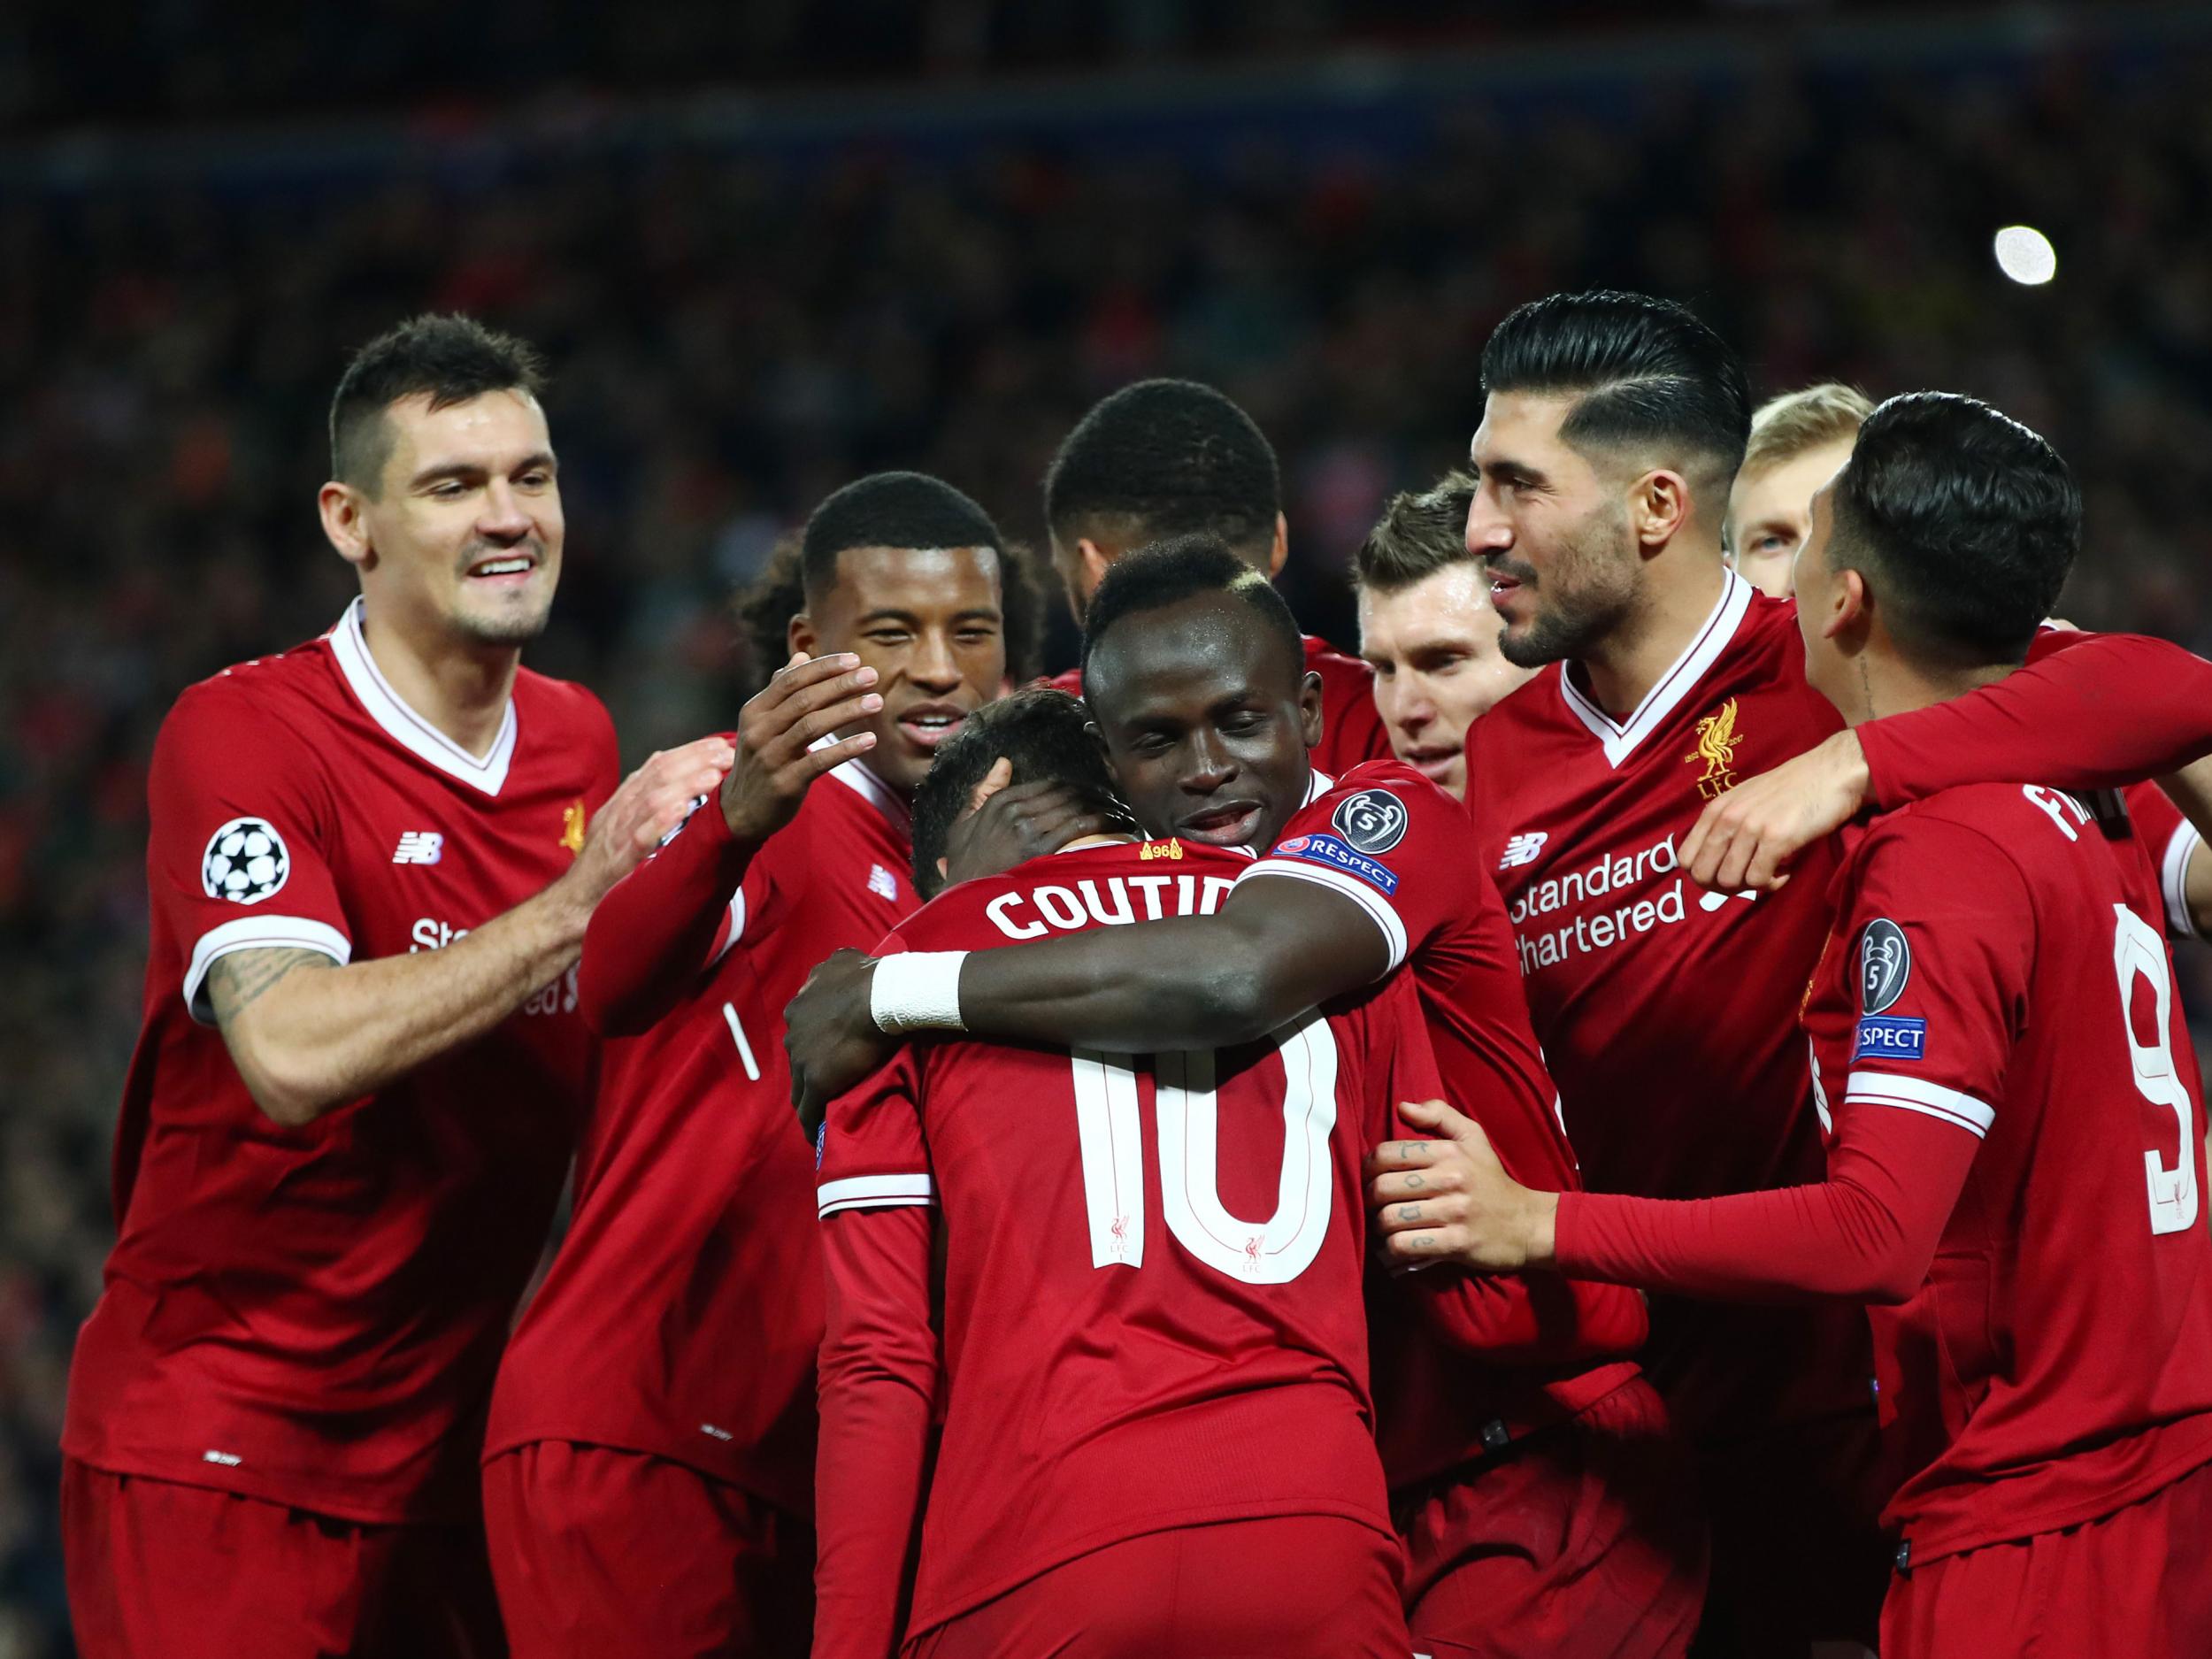 Liverpool qualified with victory over Spartak Moscow at Anfield last week